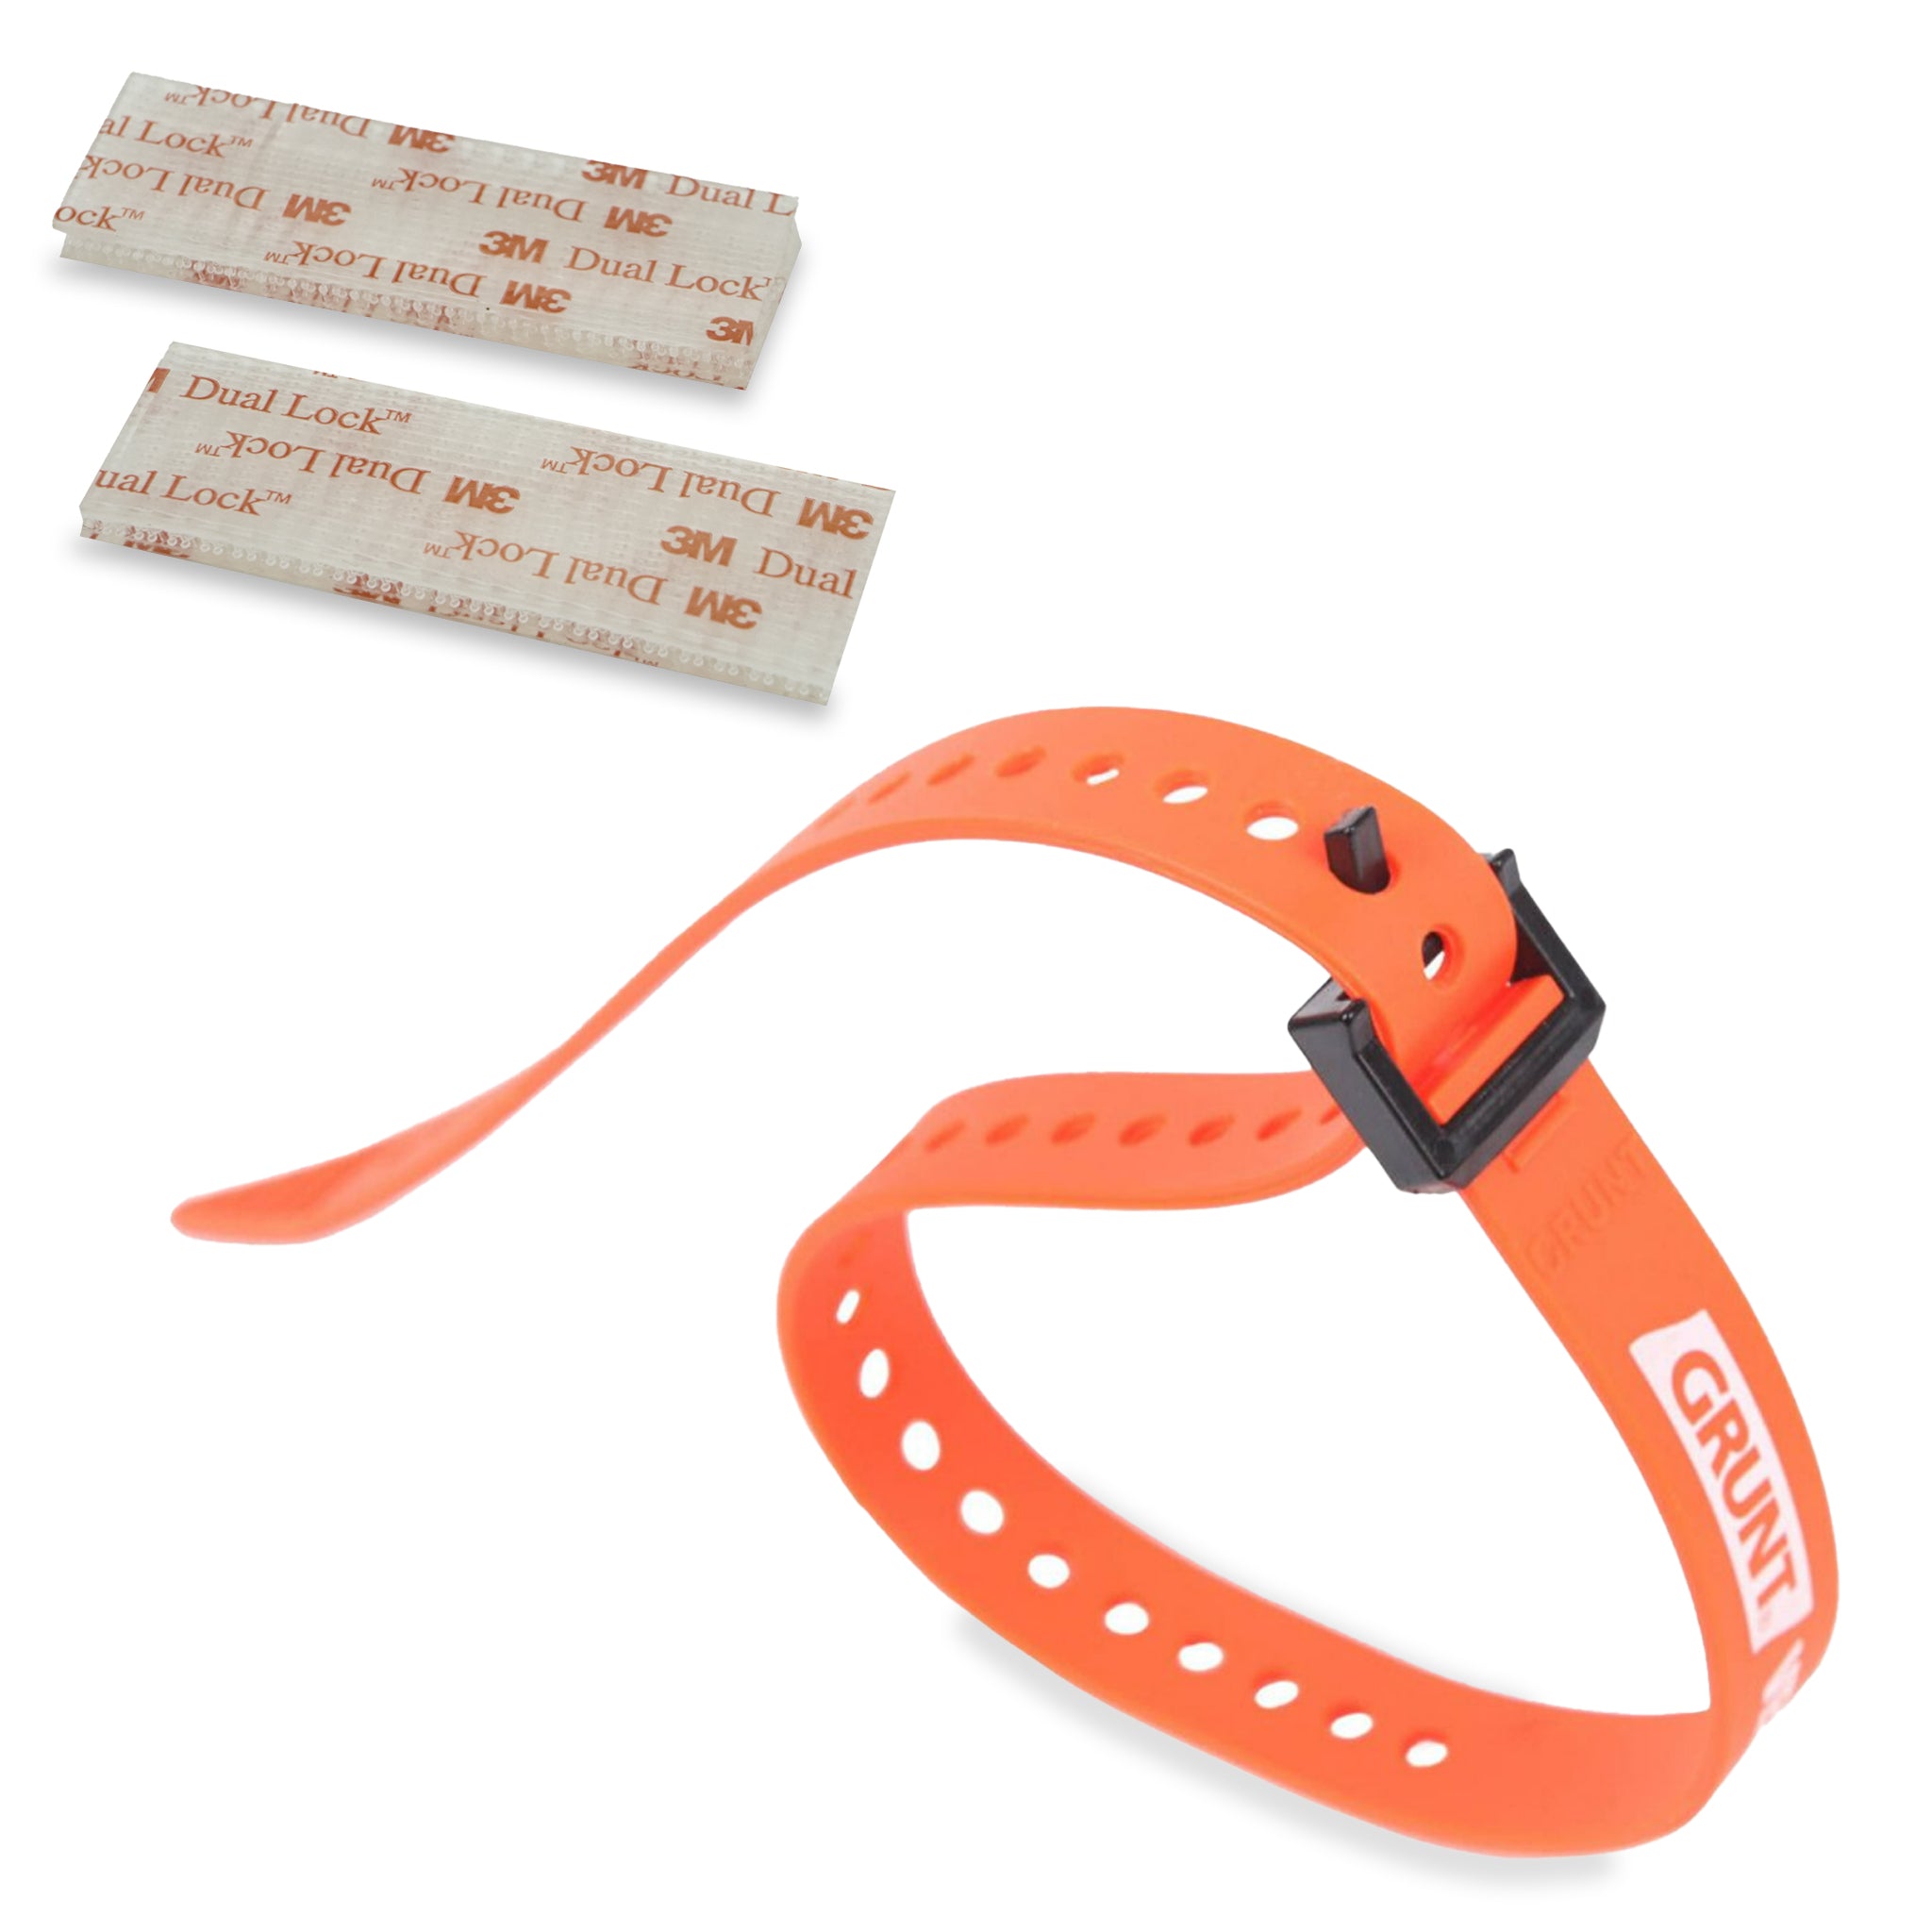 Foil Drive Rubber Strap and 3M Dual Lock